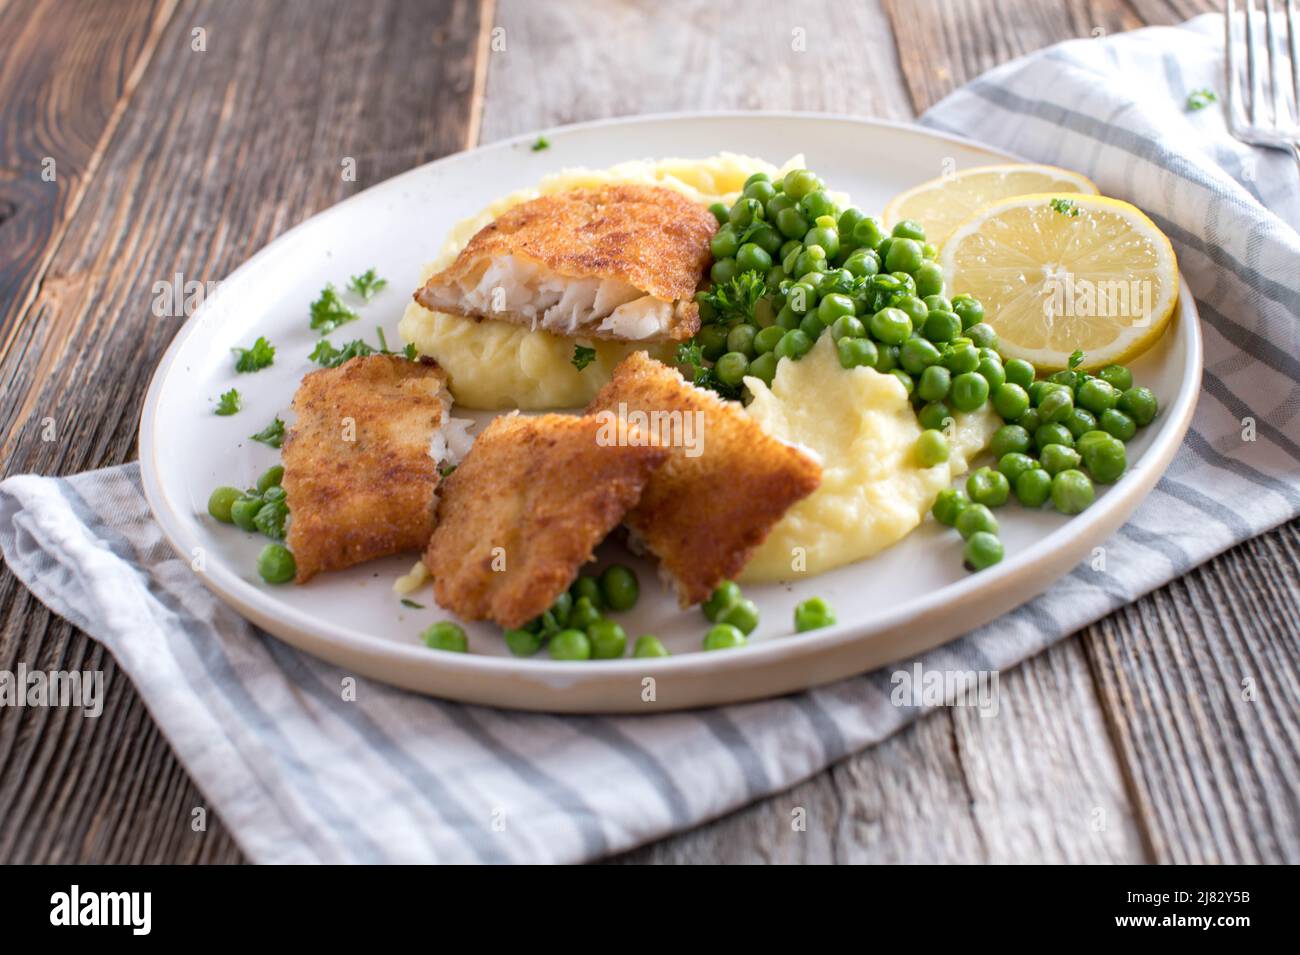 Breaded redfish with mashed potatoes and green peas on a plate Stock Photo